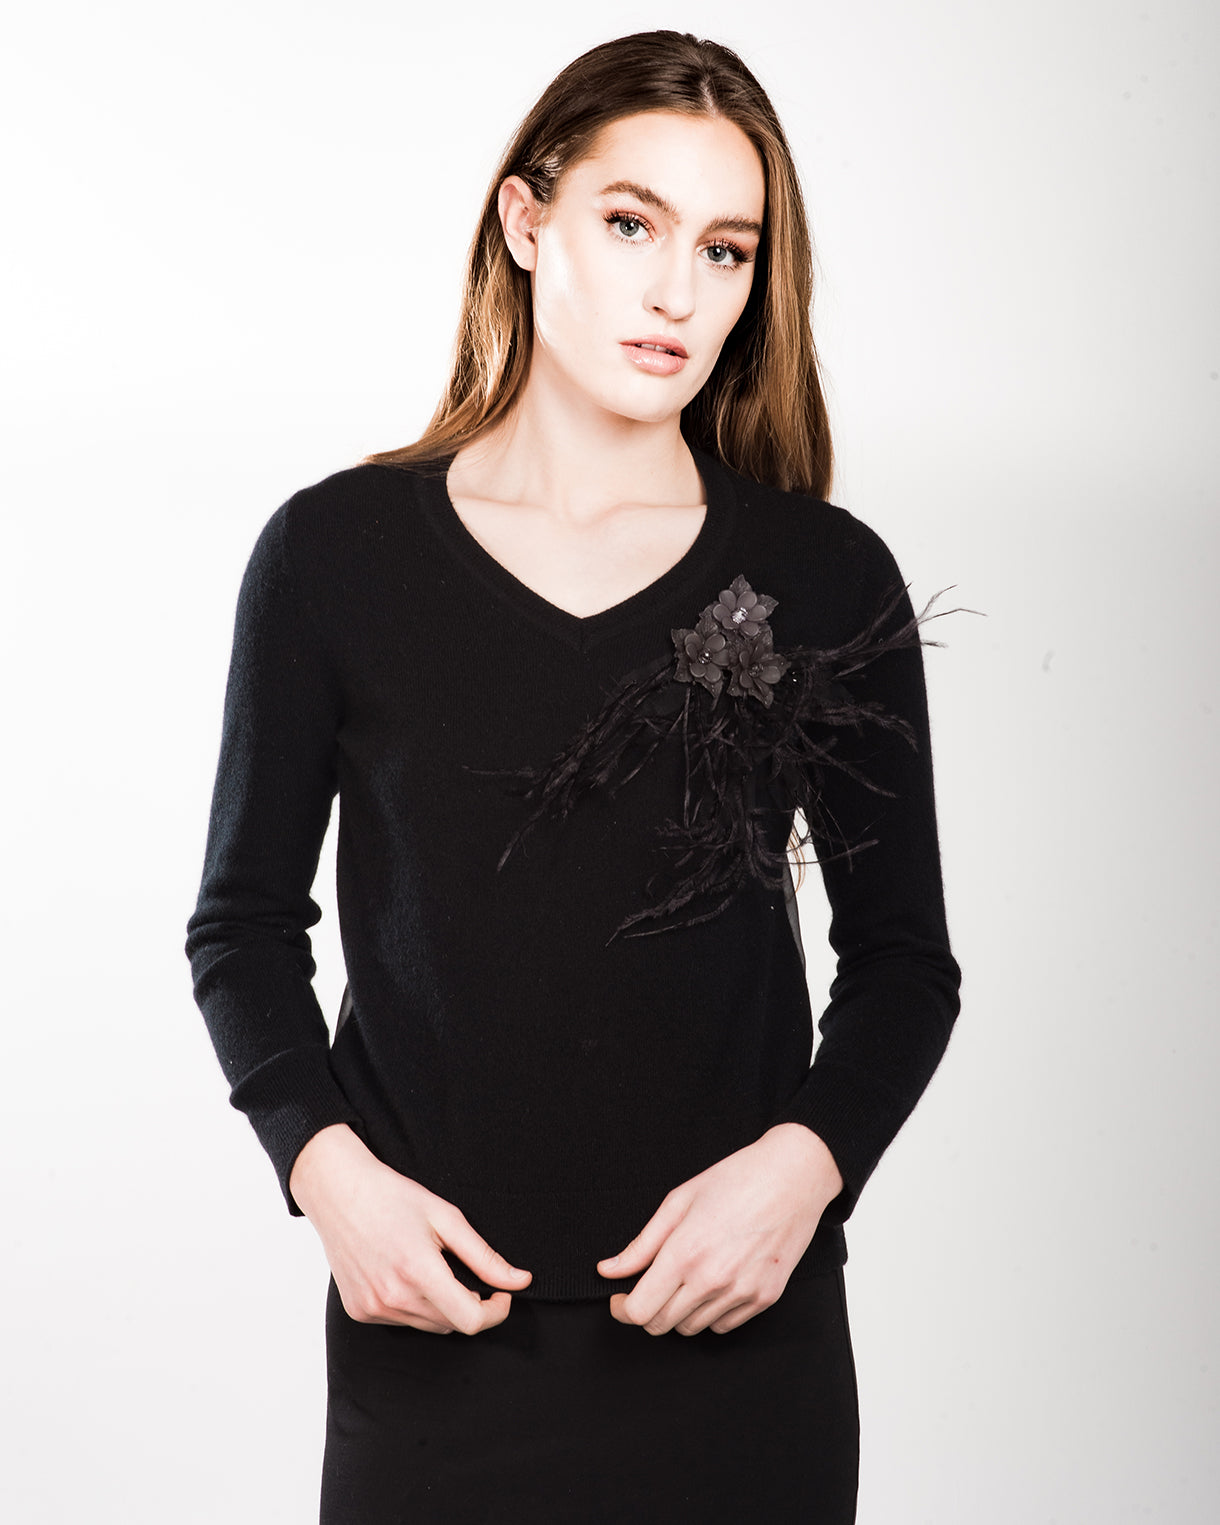 SMALL BLACK LONG SLEEVE V-NECK CASHMERE SWEATER WITH 3 3D BAKELITE FLORAL & FEATHER APLIQUE WITH BLACK SILK ORGANZA BACK